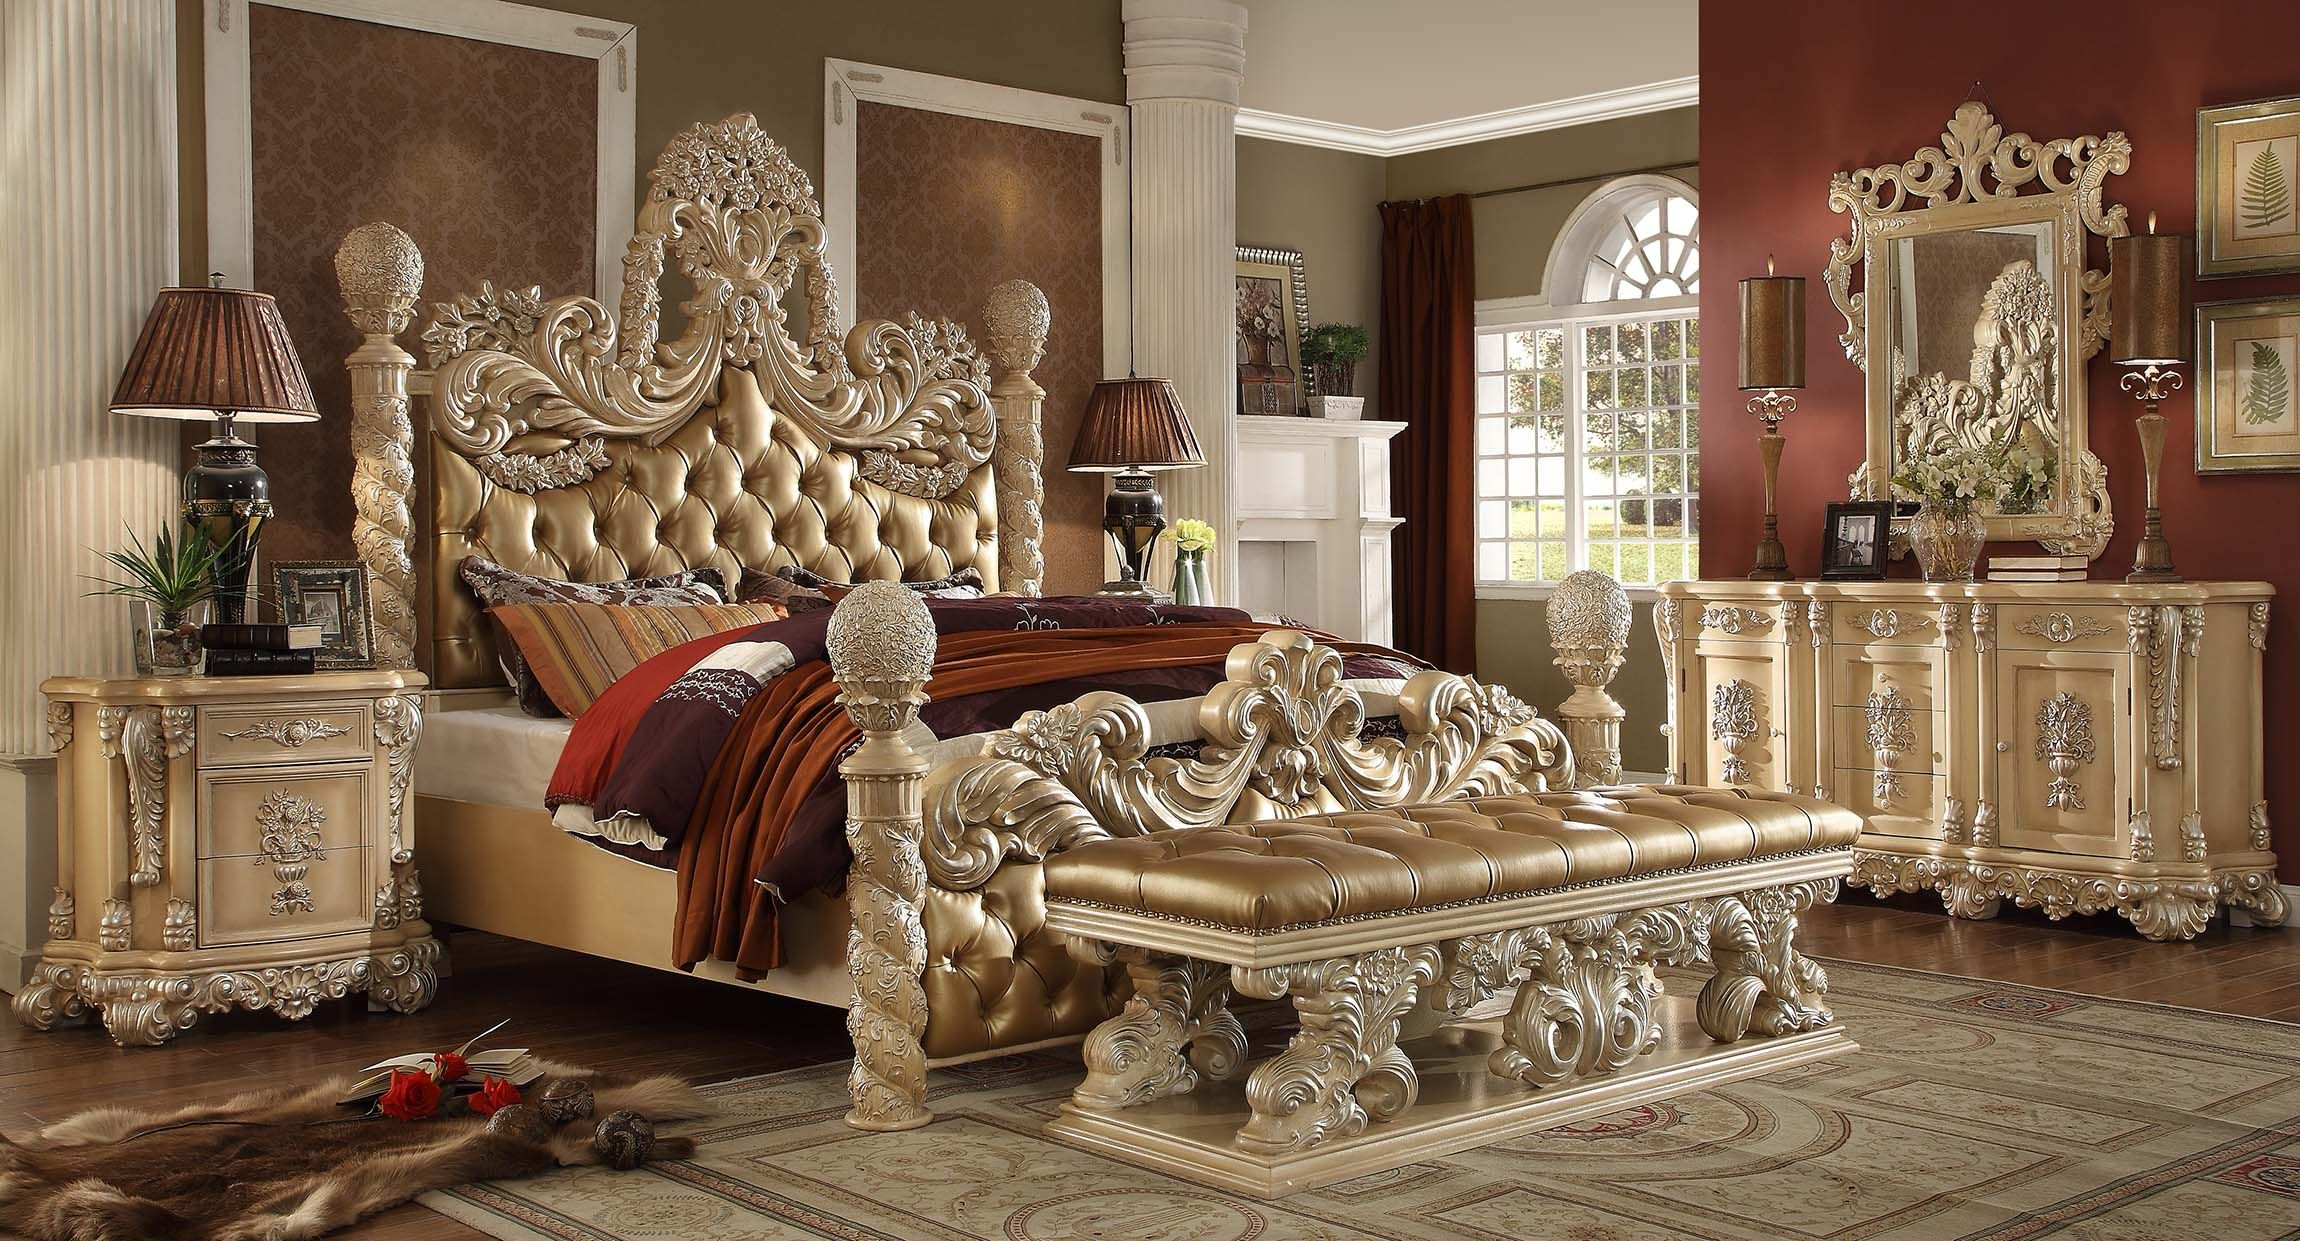 Royale Inspired European Bedroom Set King 6 Pc Hd 7266 In 2019 in dimensions 2300 X 1241